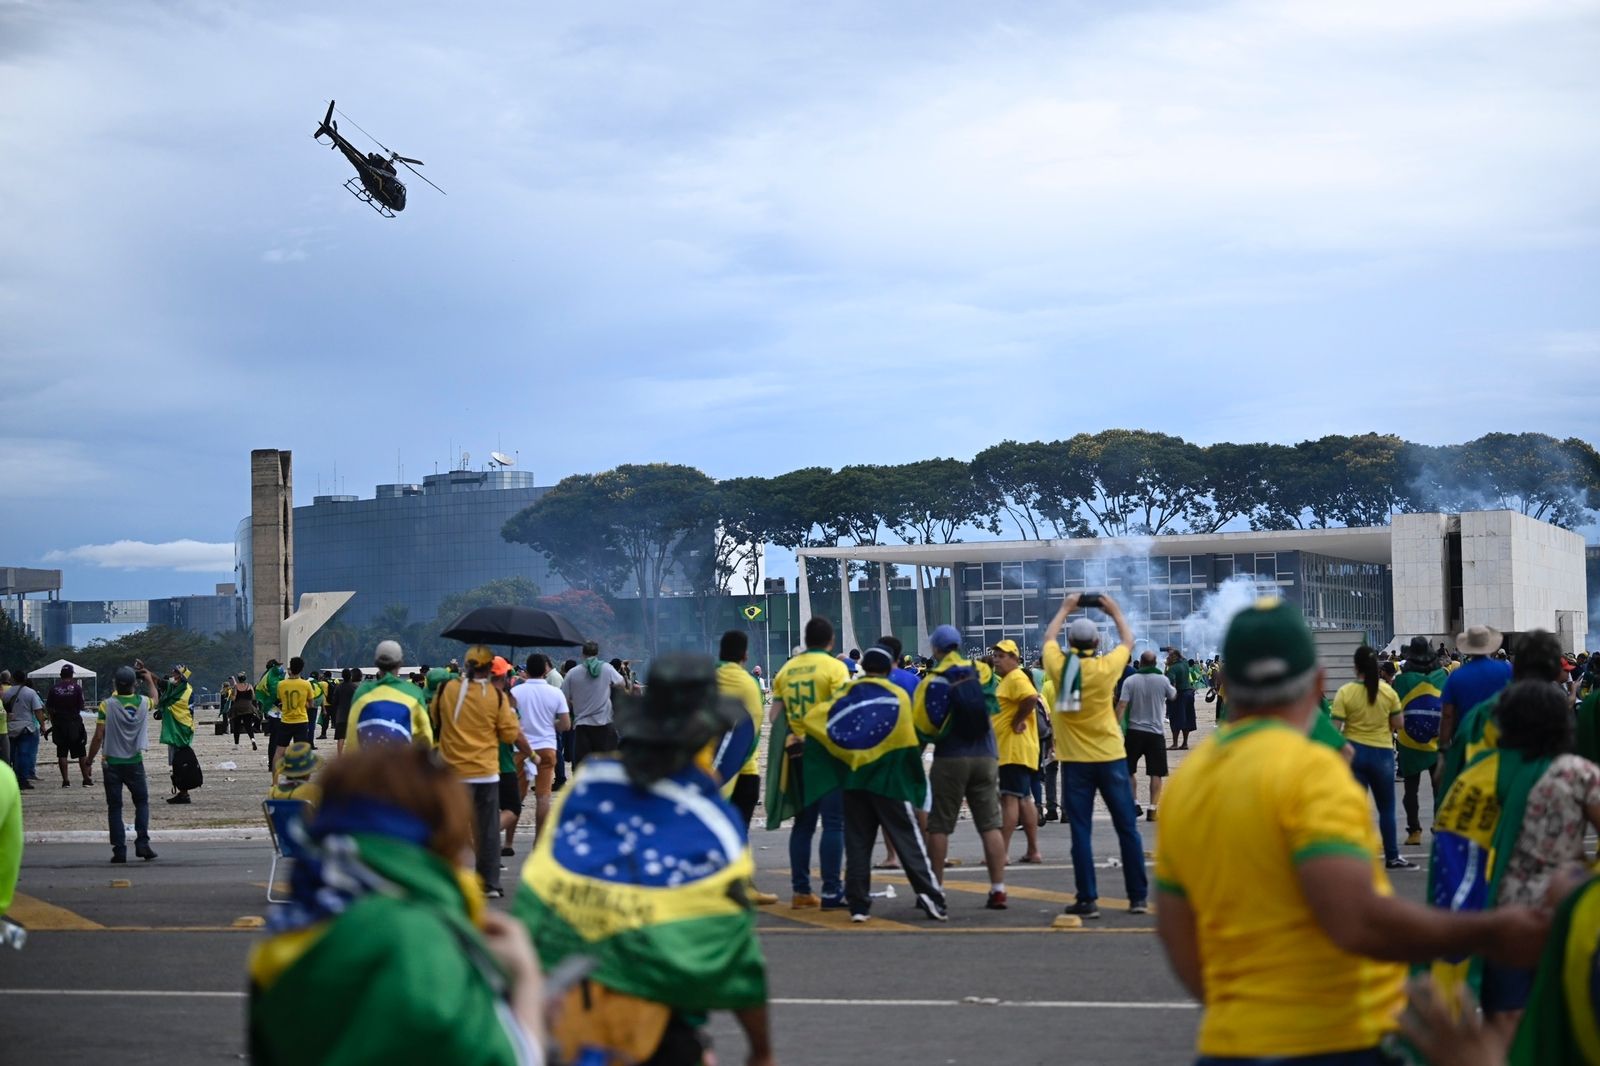 A helicopter flying over Bolsonaro supporters outside the National Congress building in Brasilia on Jan. 8.